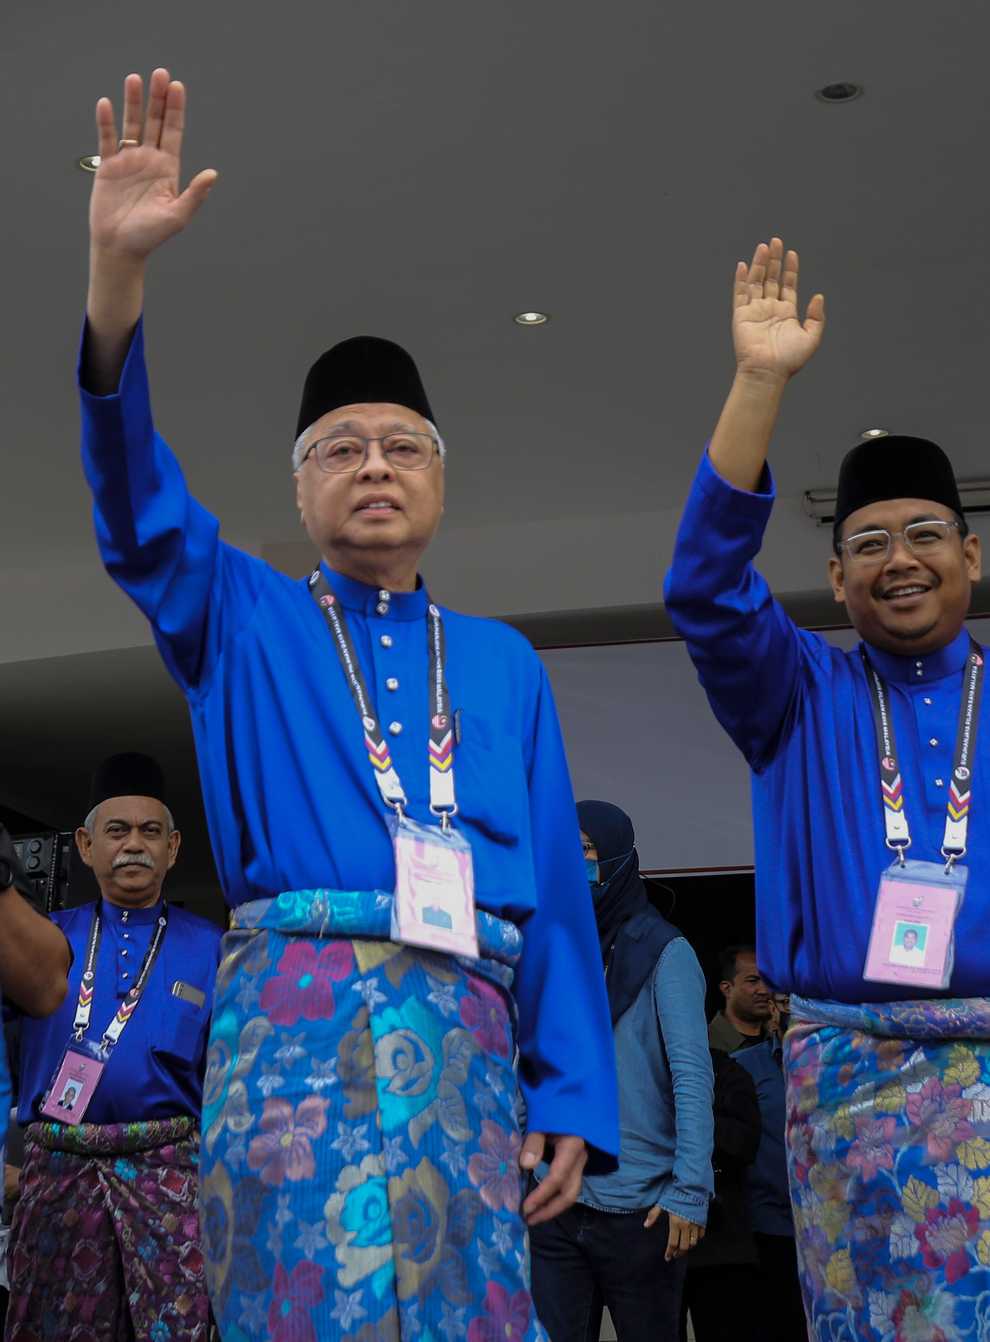 Malaysian Prime Minister Ismail Sabri Yaakob, center, waves to his supporters after his nomination documents were accepted for the upcoming general election in Bera, Pahang, Malaysia, Saturday, Nov. 5, 2022 (Ahmad Yusni/AP/PA)